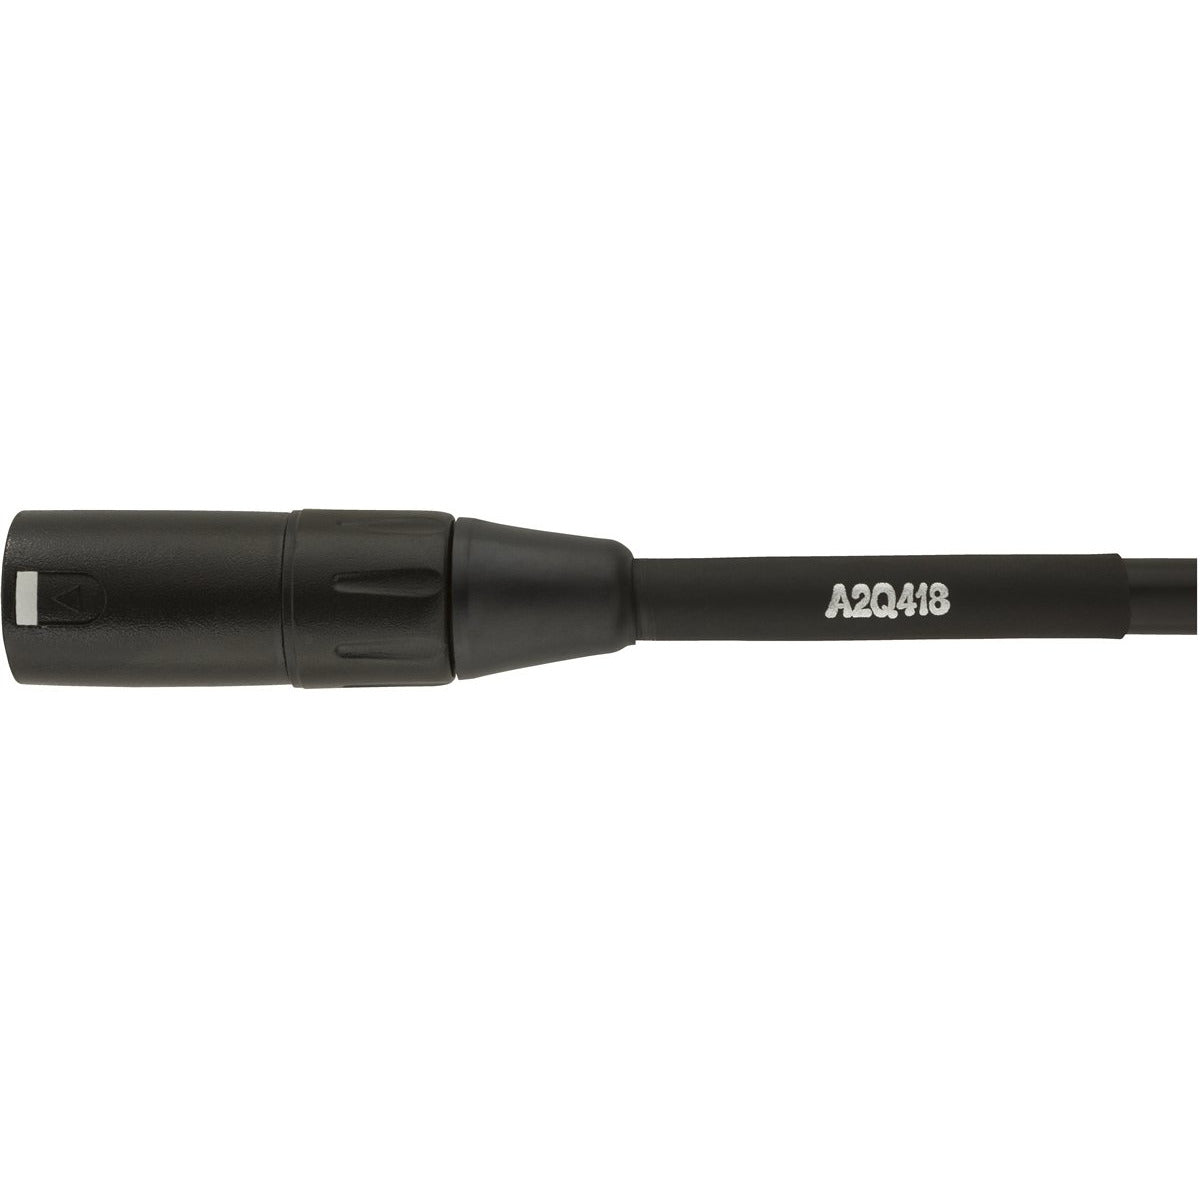 Female End That Reads A2Q418 for Fender Professional Series Microphone Cable